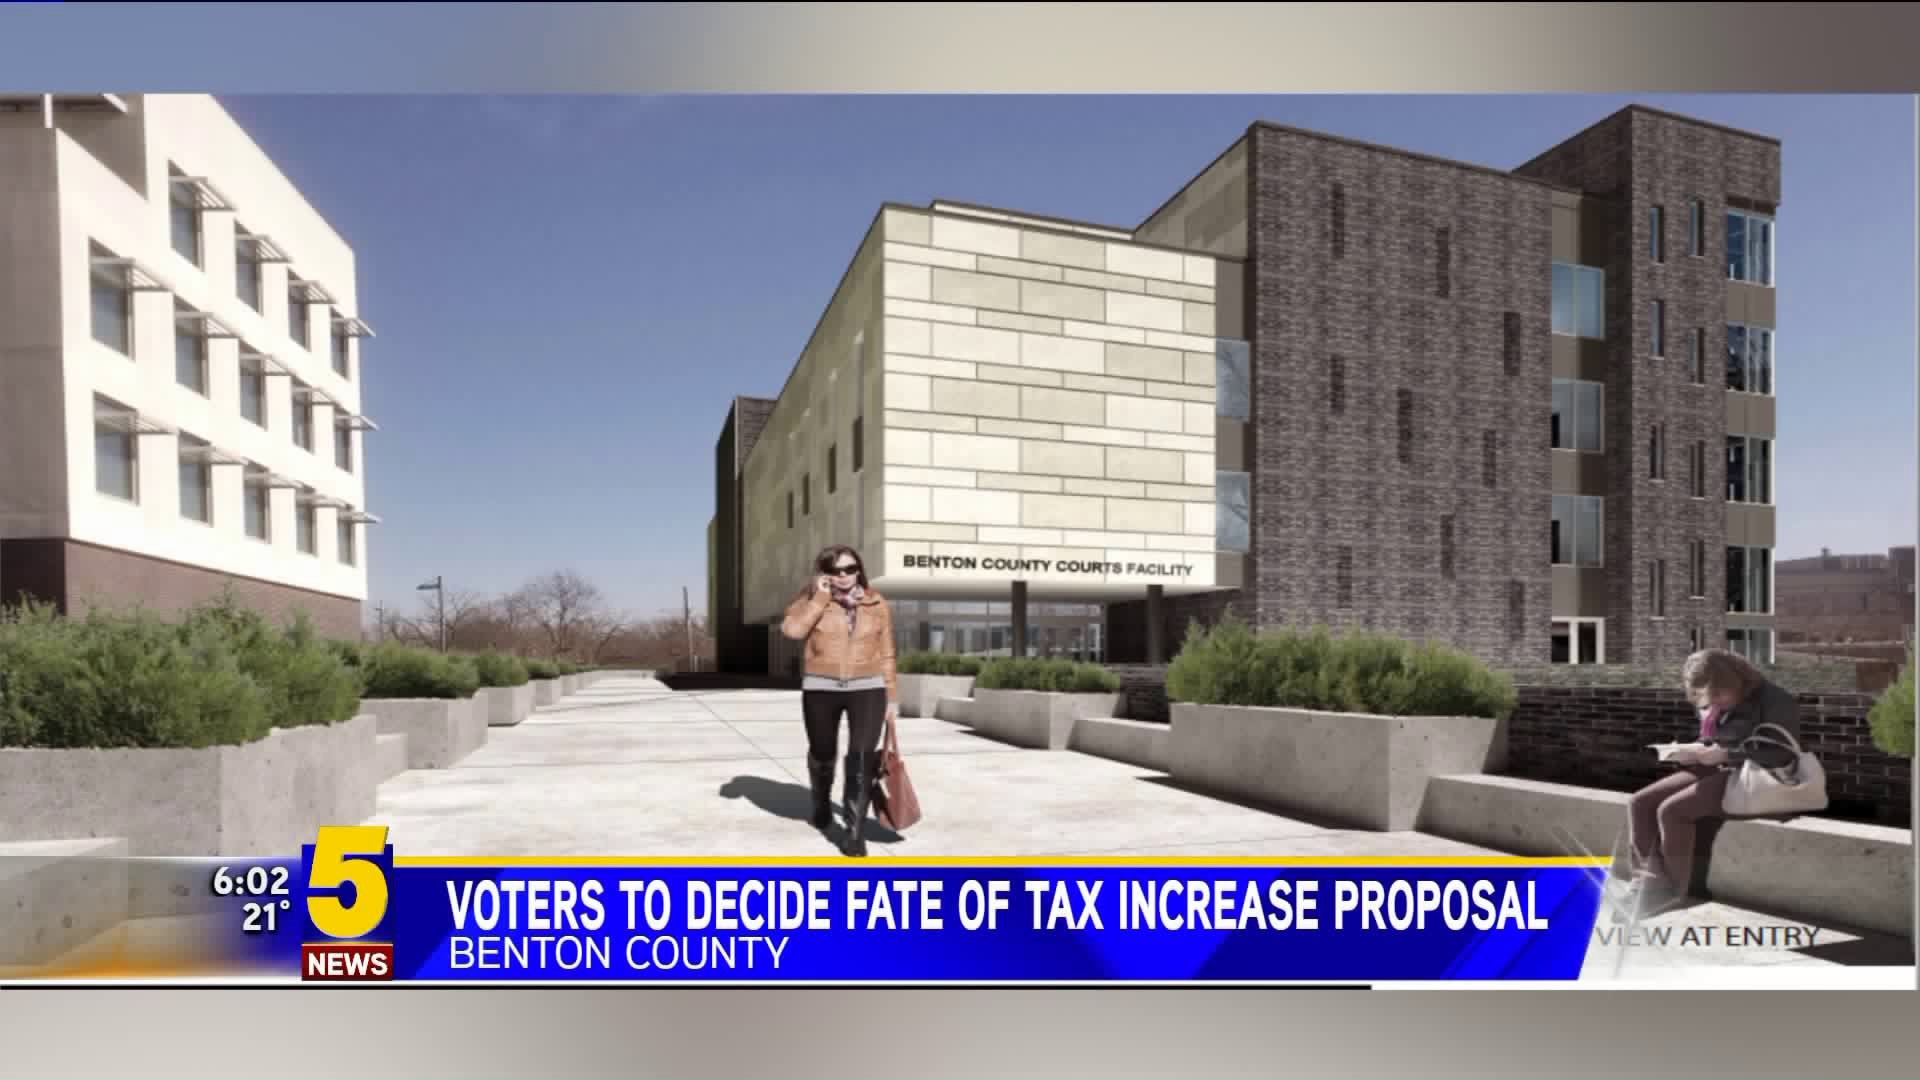 Benton County Voters To Decide Fate Of Tax Increase Proposal